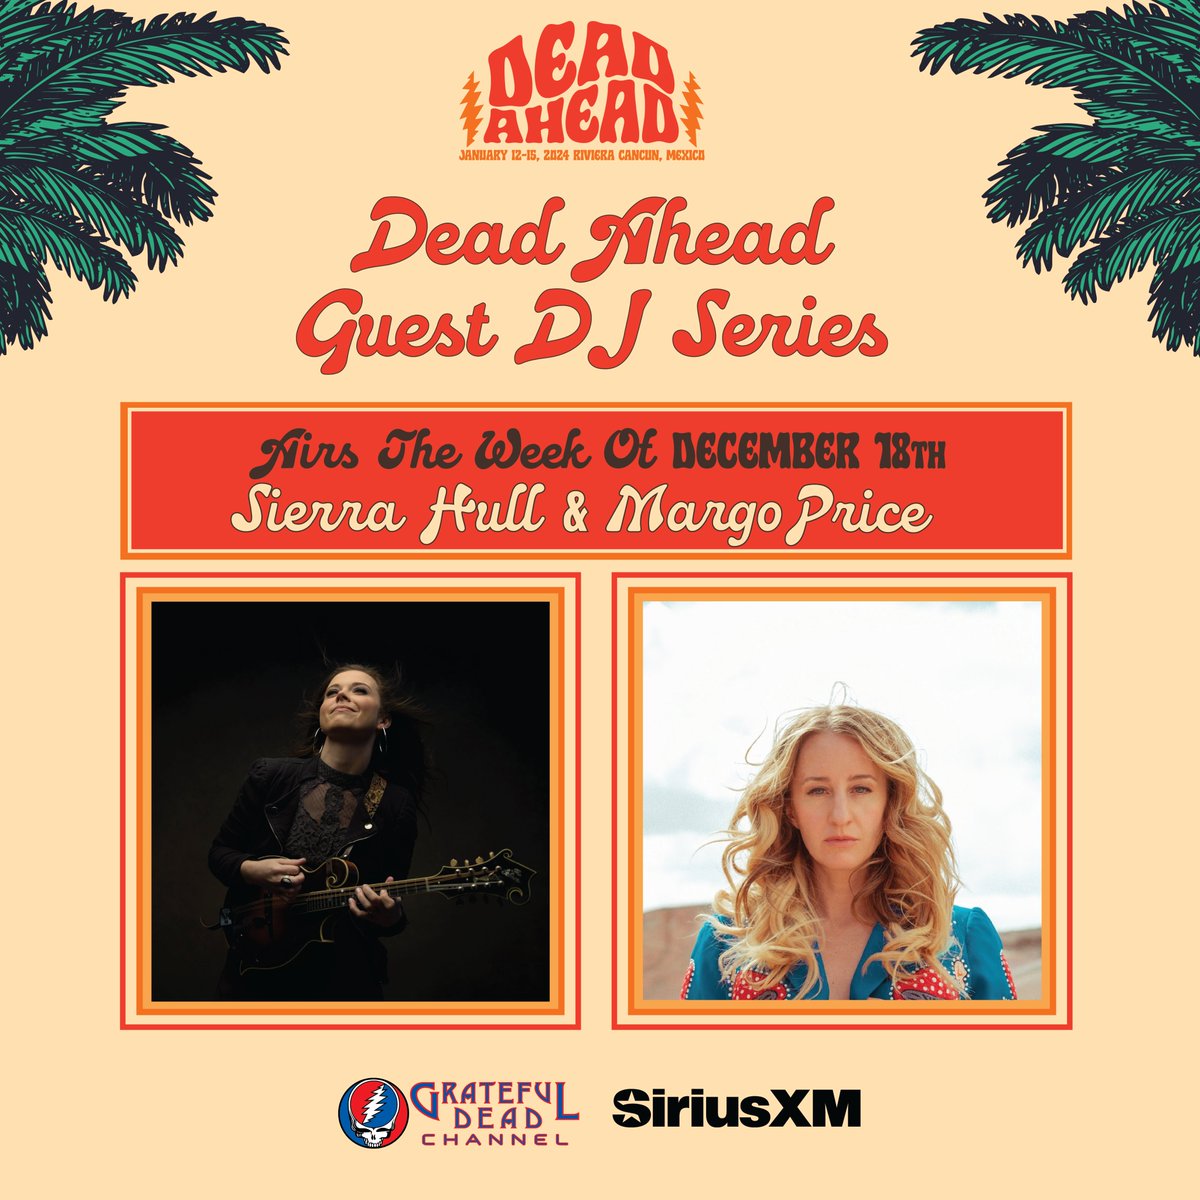 Tune into the Grateful Dead Channel again this week for our #DeadAhead Guest DJ series! This week Sierra Hull & Margo Price are at the helm.